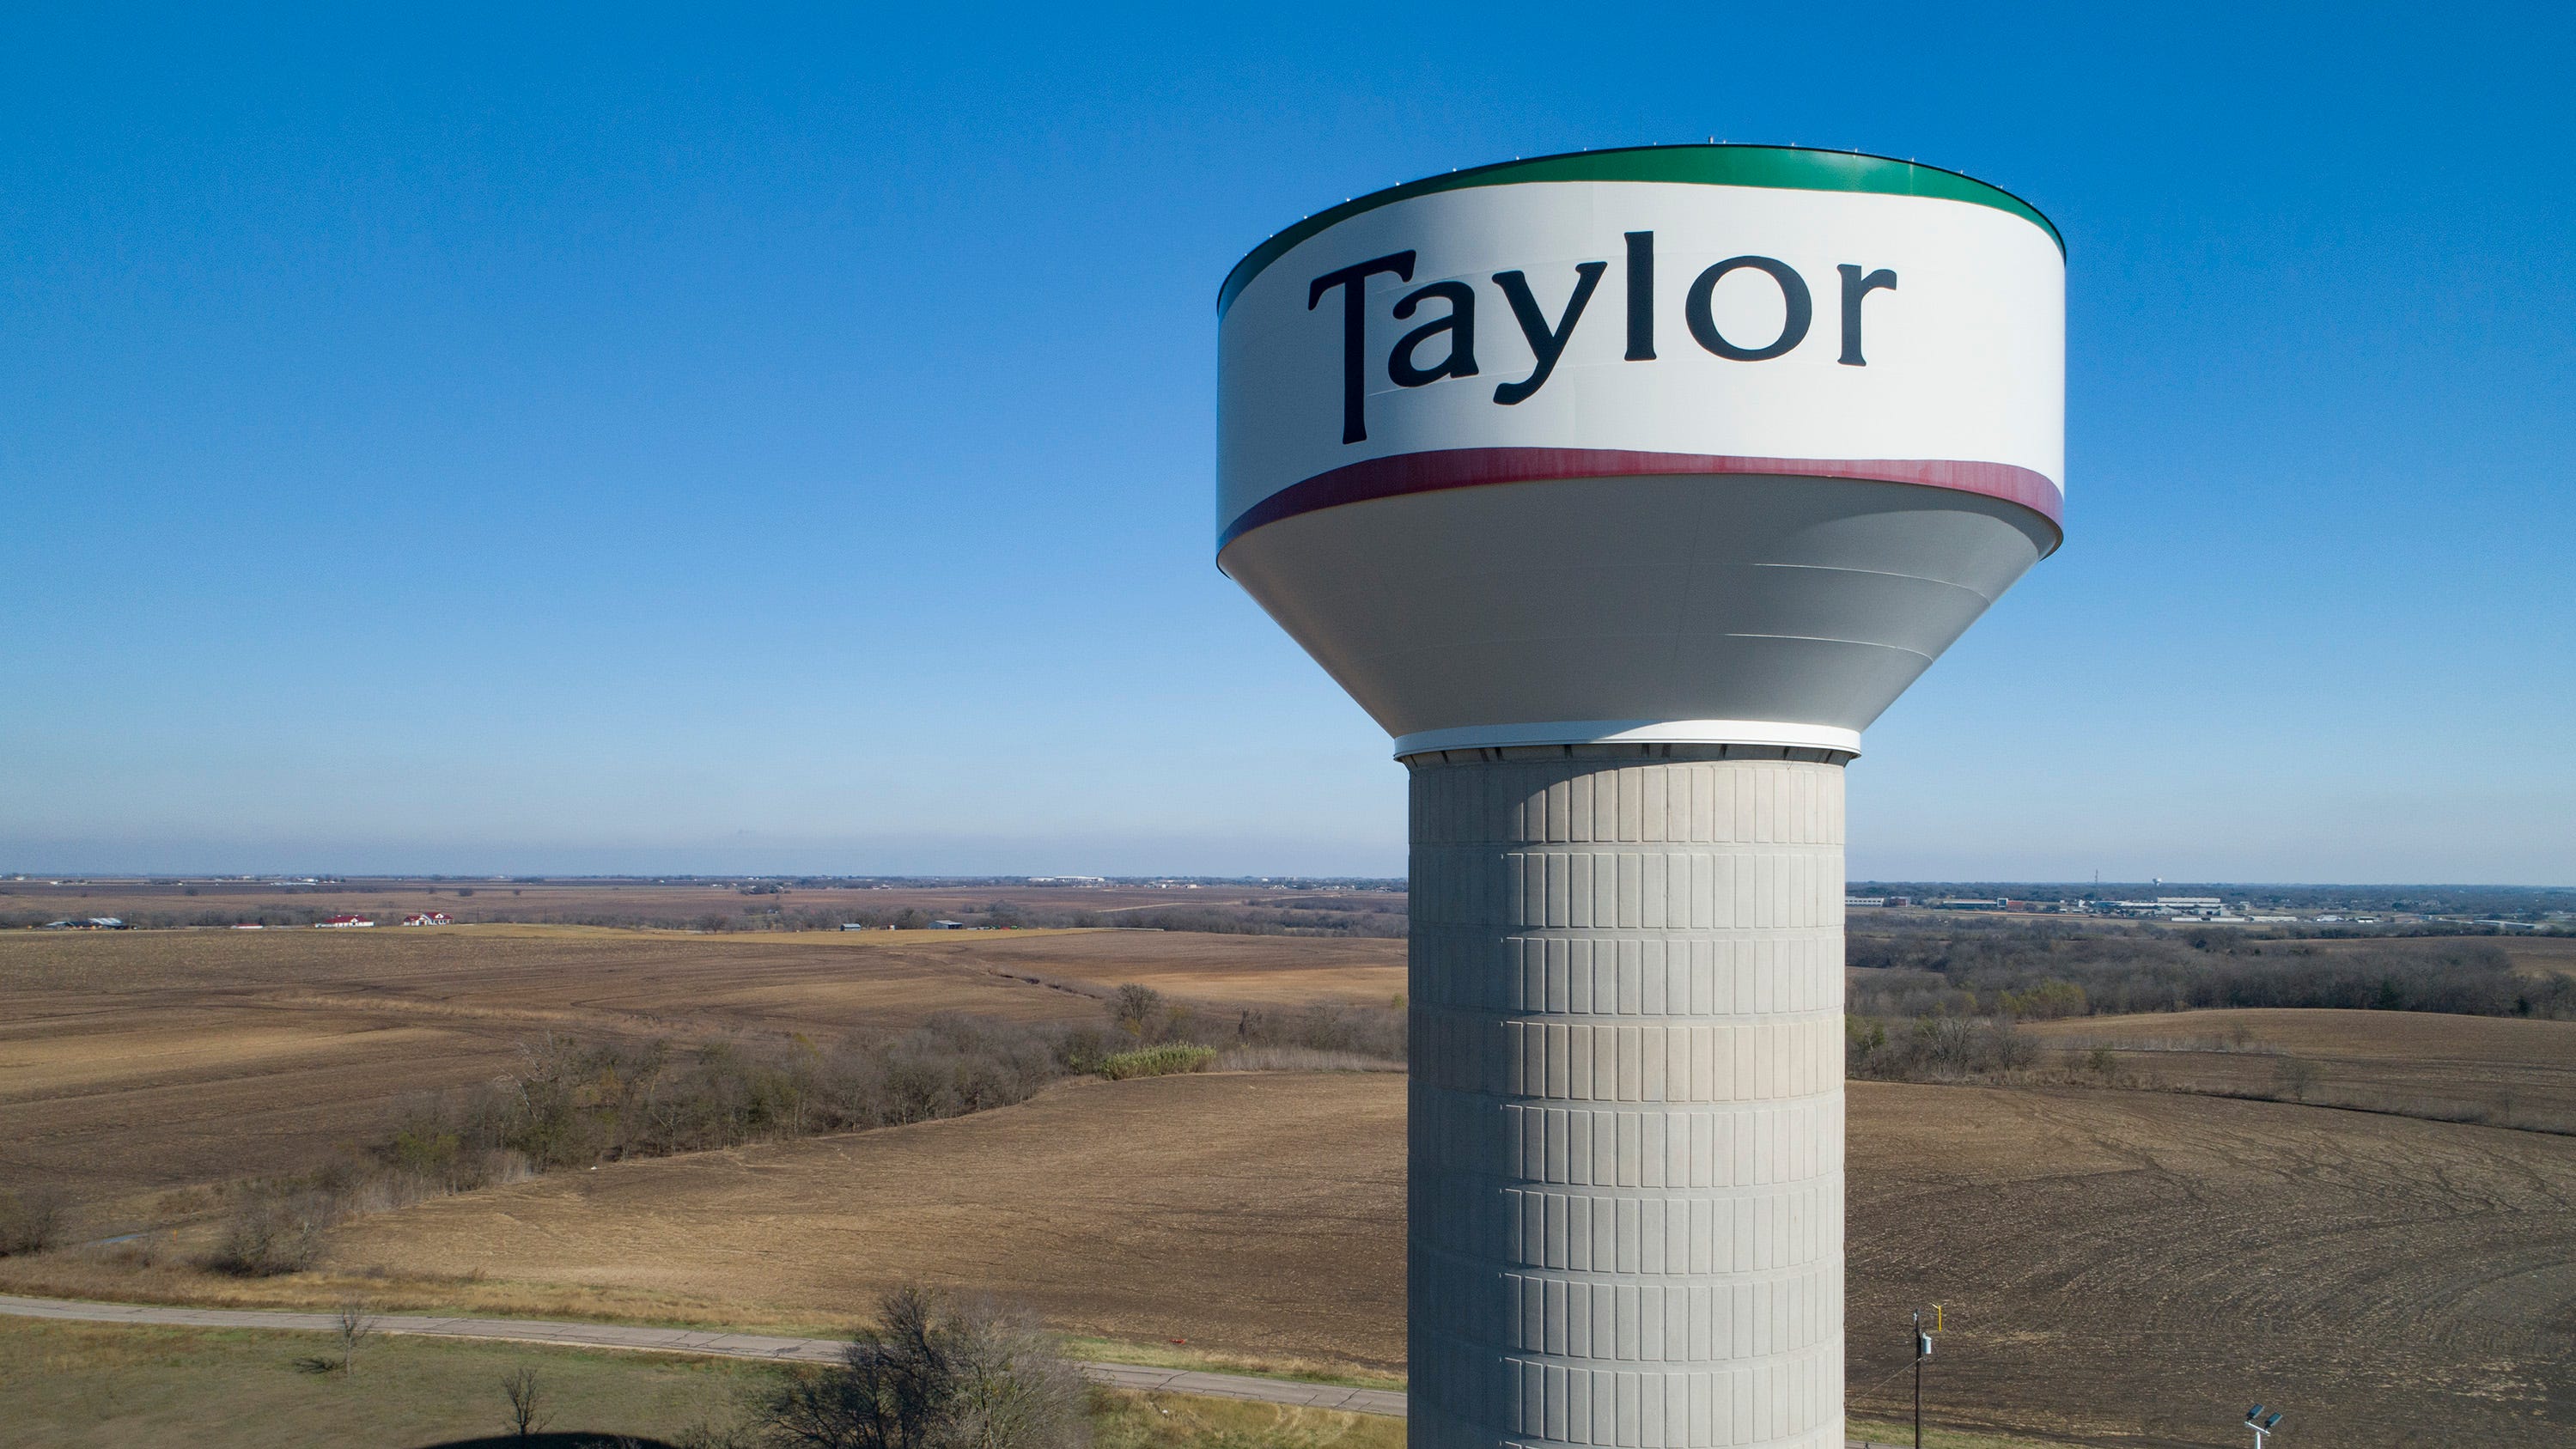 incentives-package-to-lure-samsung-to-taylor-is-biggest-in-texas-history